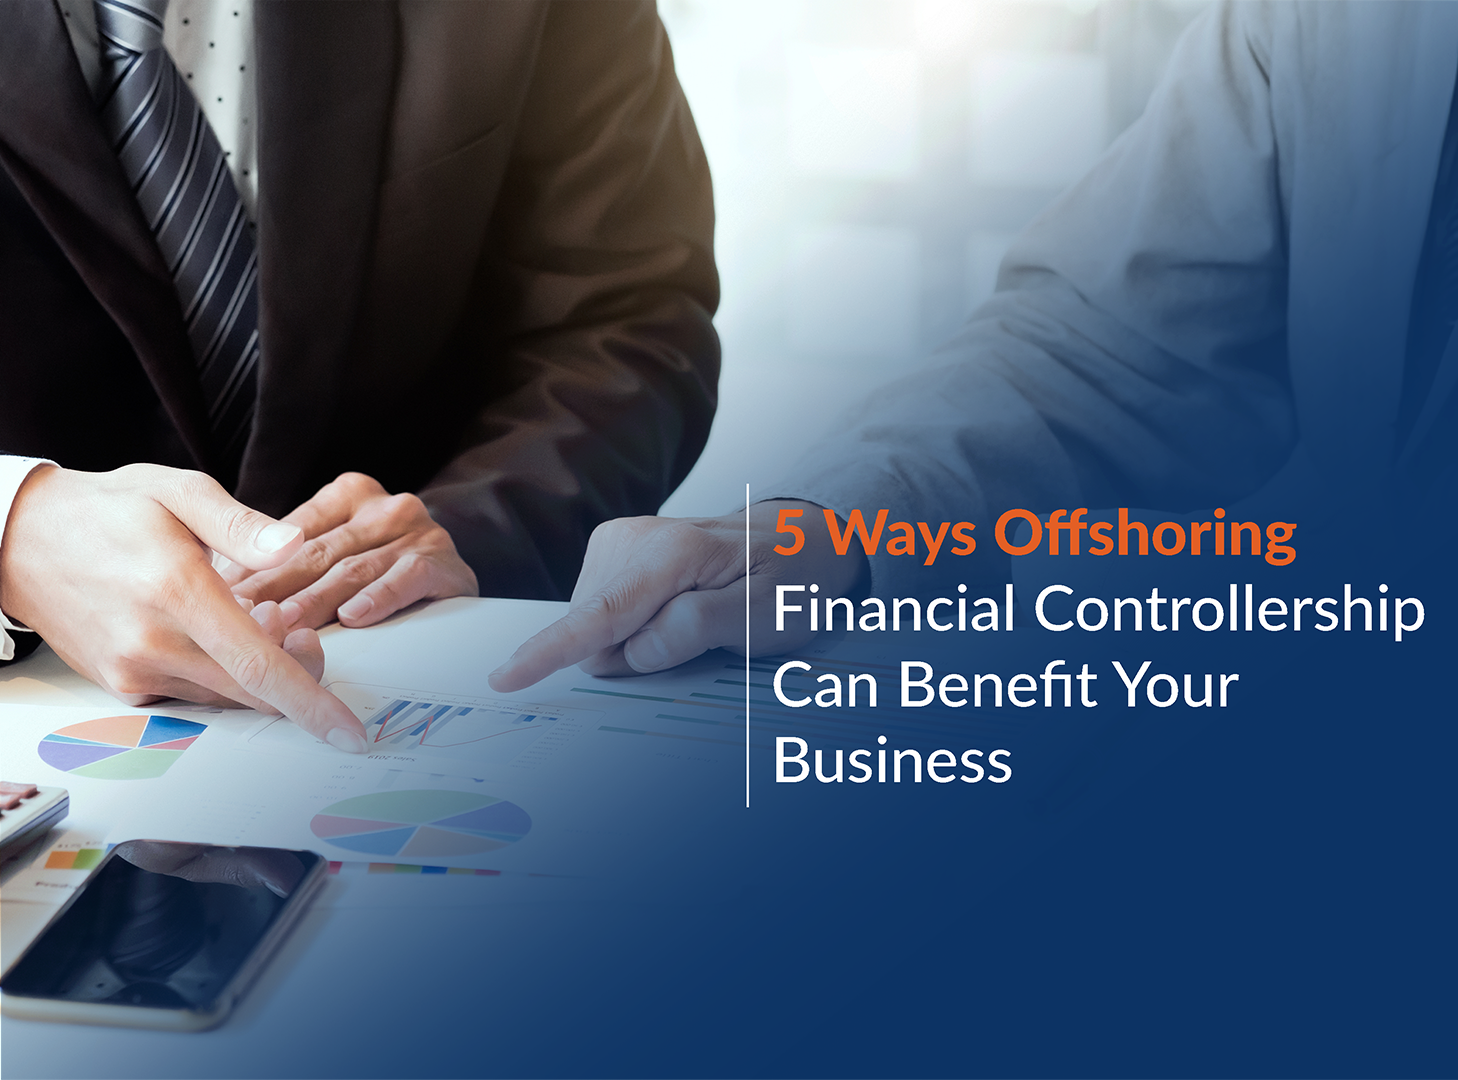 Ways Offshoring Financial Controllership Can Benefit Your Business